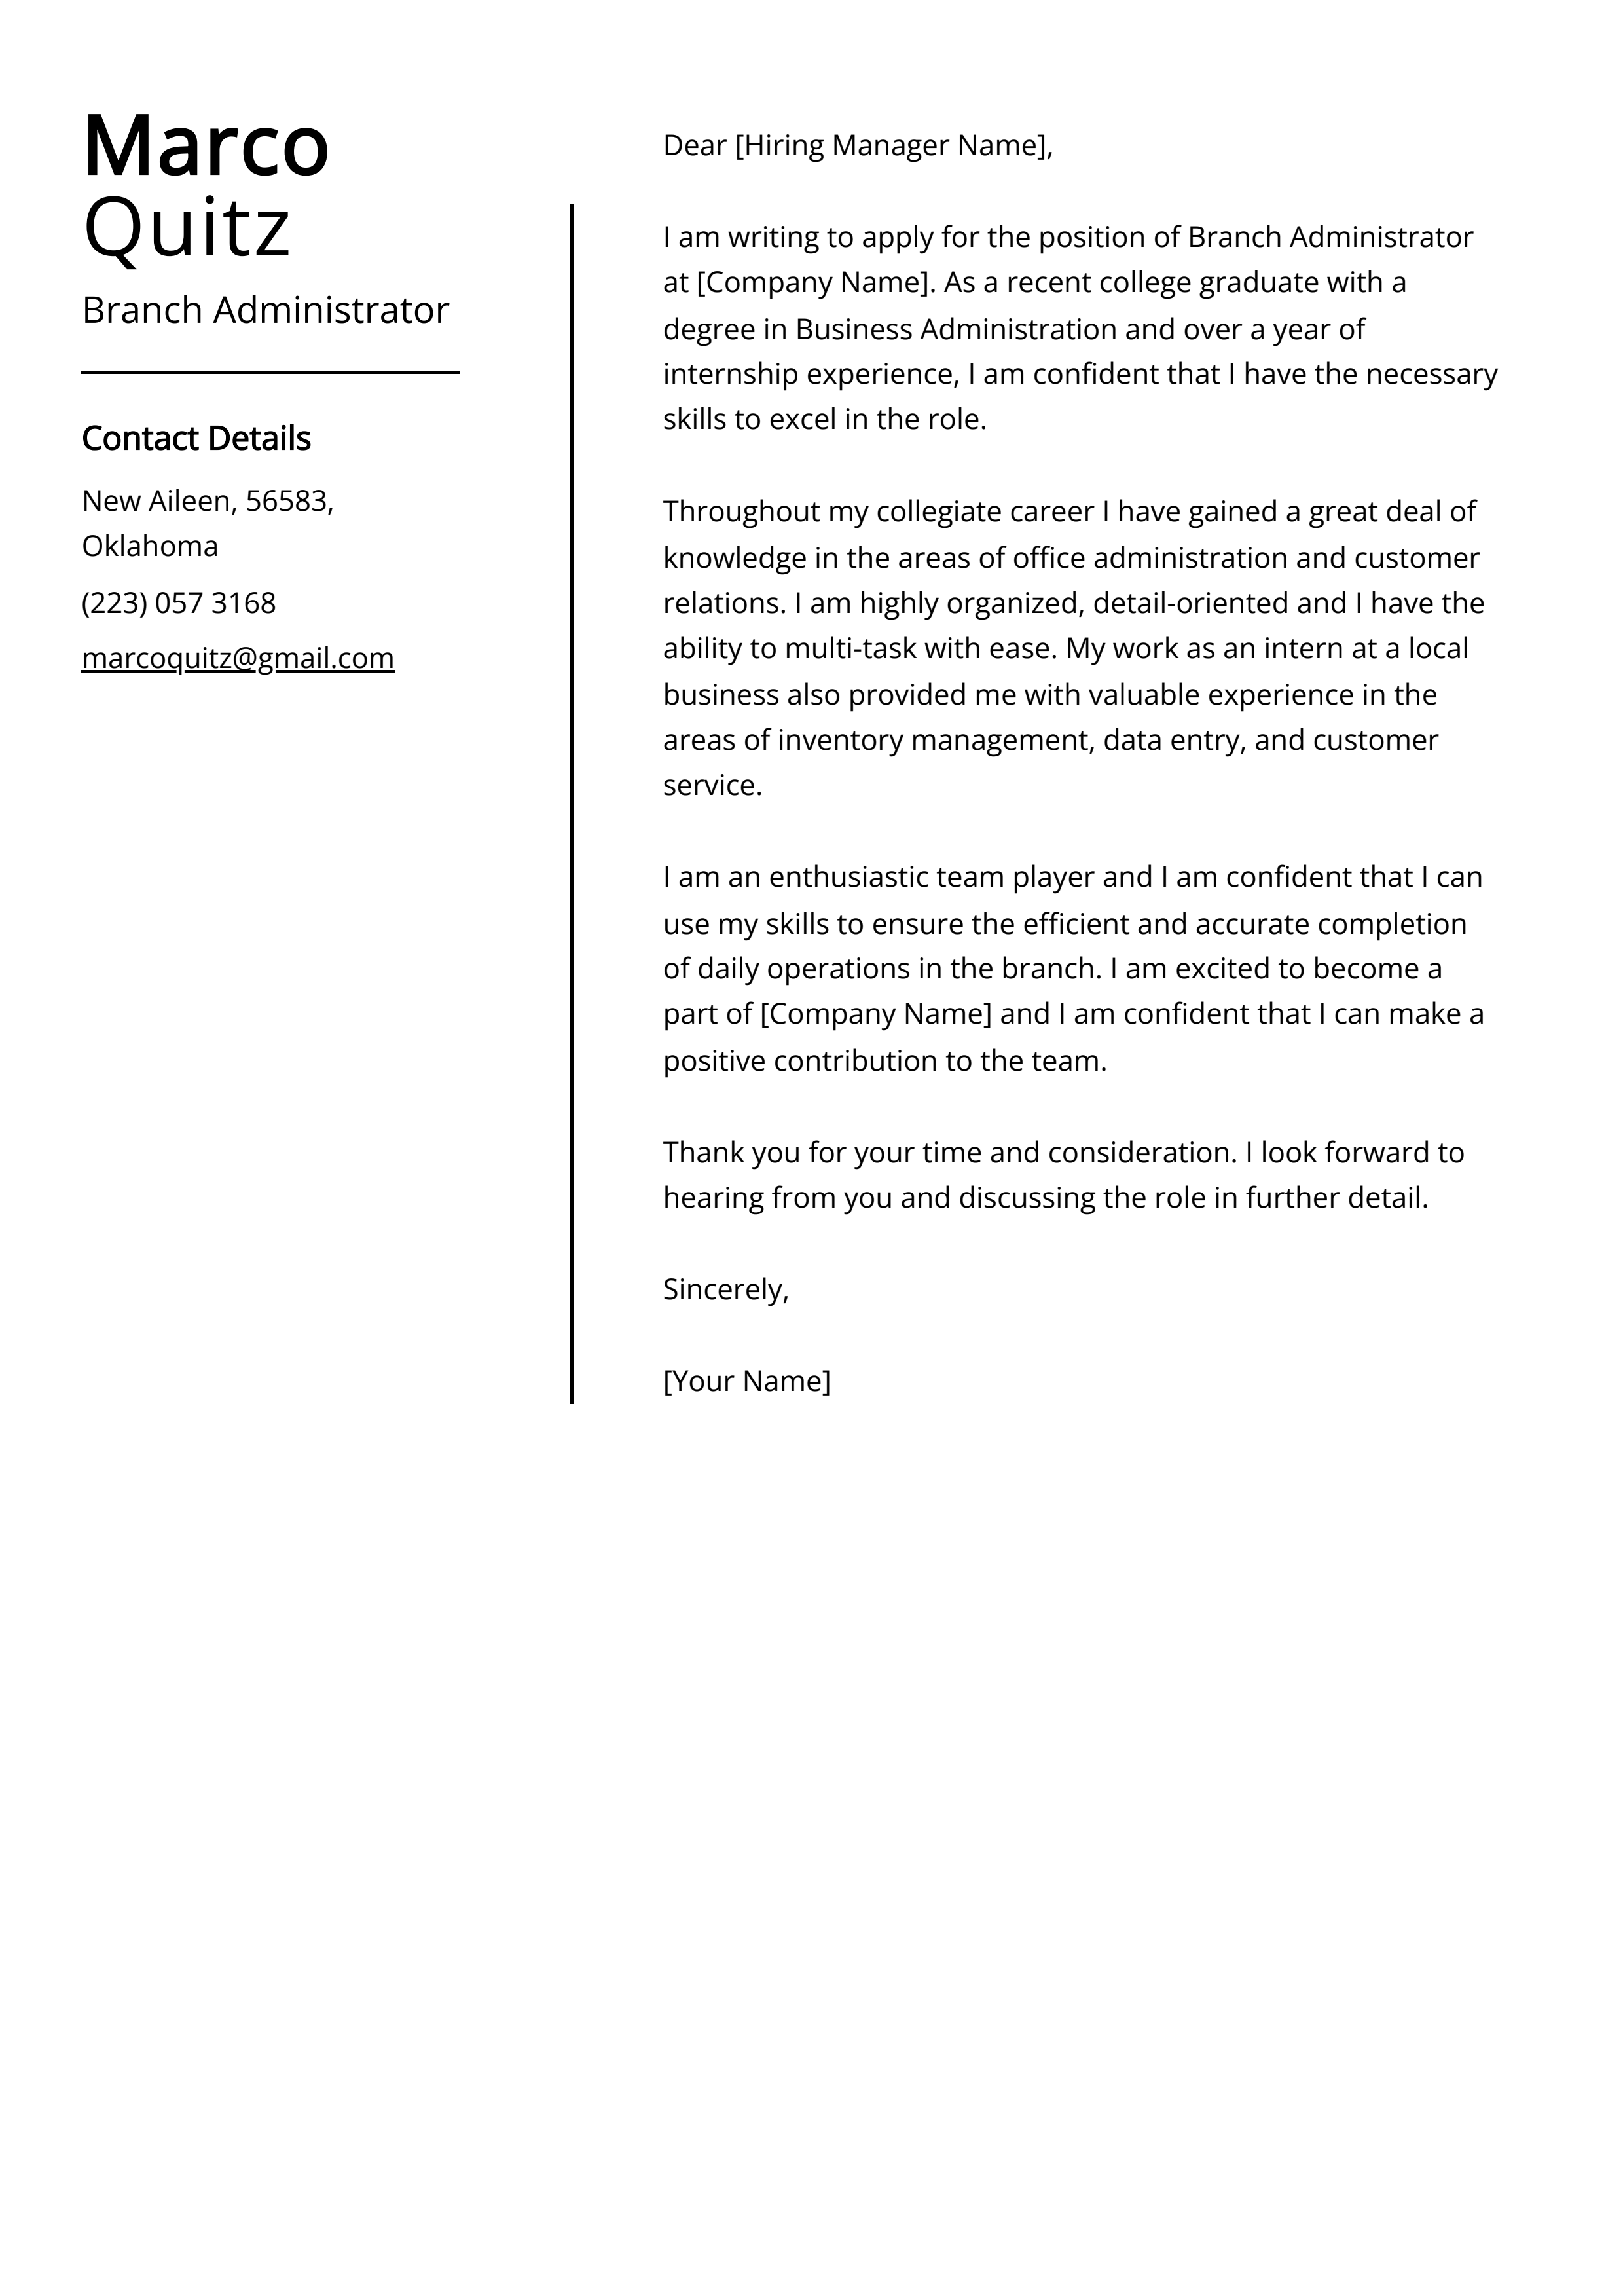 Branch Administrator Cover Letter Example